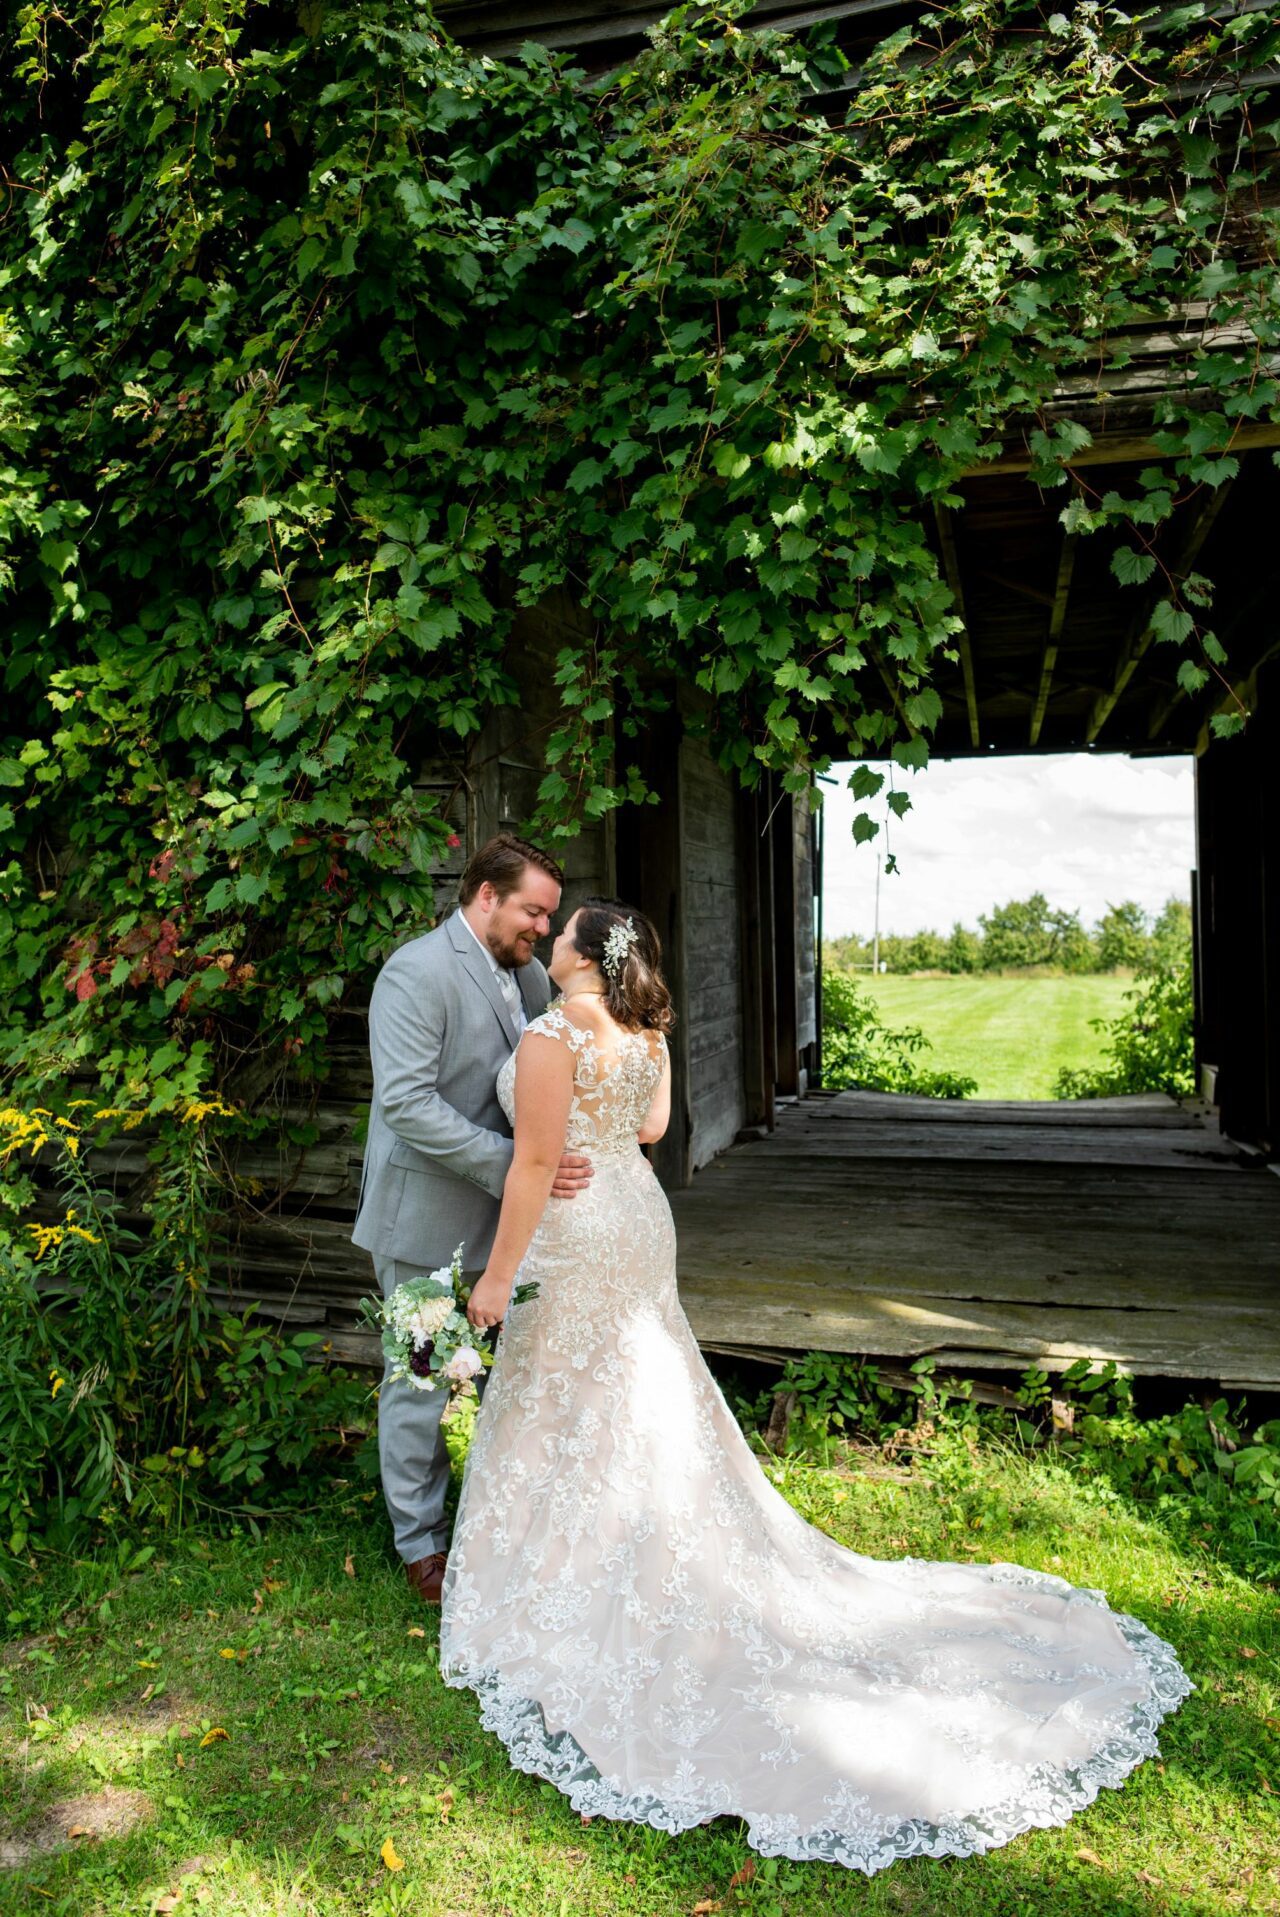 Bride & Groom with a nature backdrop